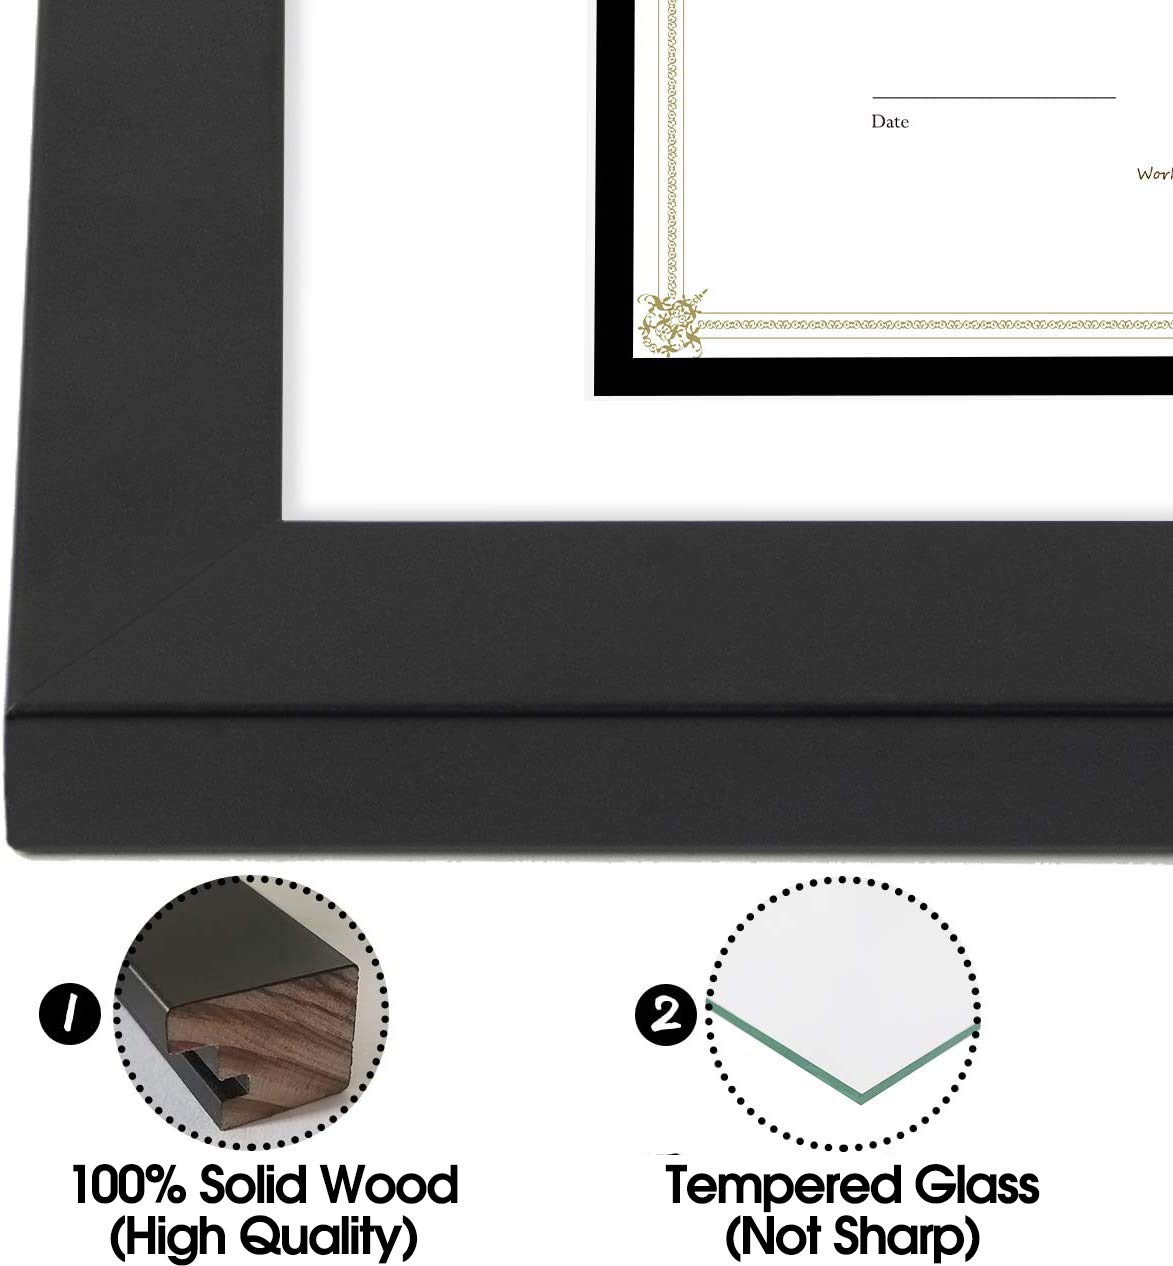 Golden State Art, 11x14 Diploma Frame for 8.5x11 Document &#x26; Certificates with Mat, Or 11x14 Without Mat, Real Glass, Double Mat (Black with White/Black, 1 Pack, Solid Wood)